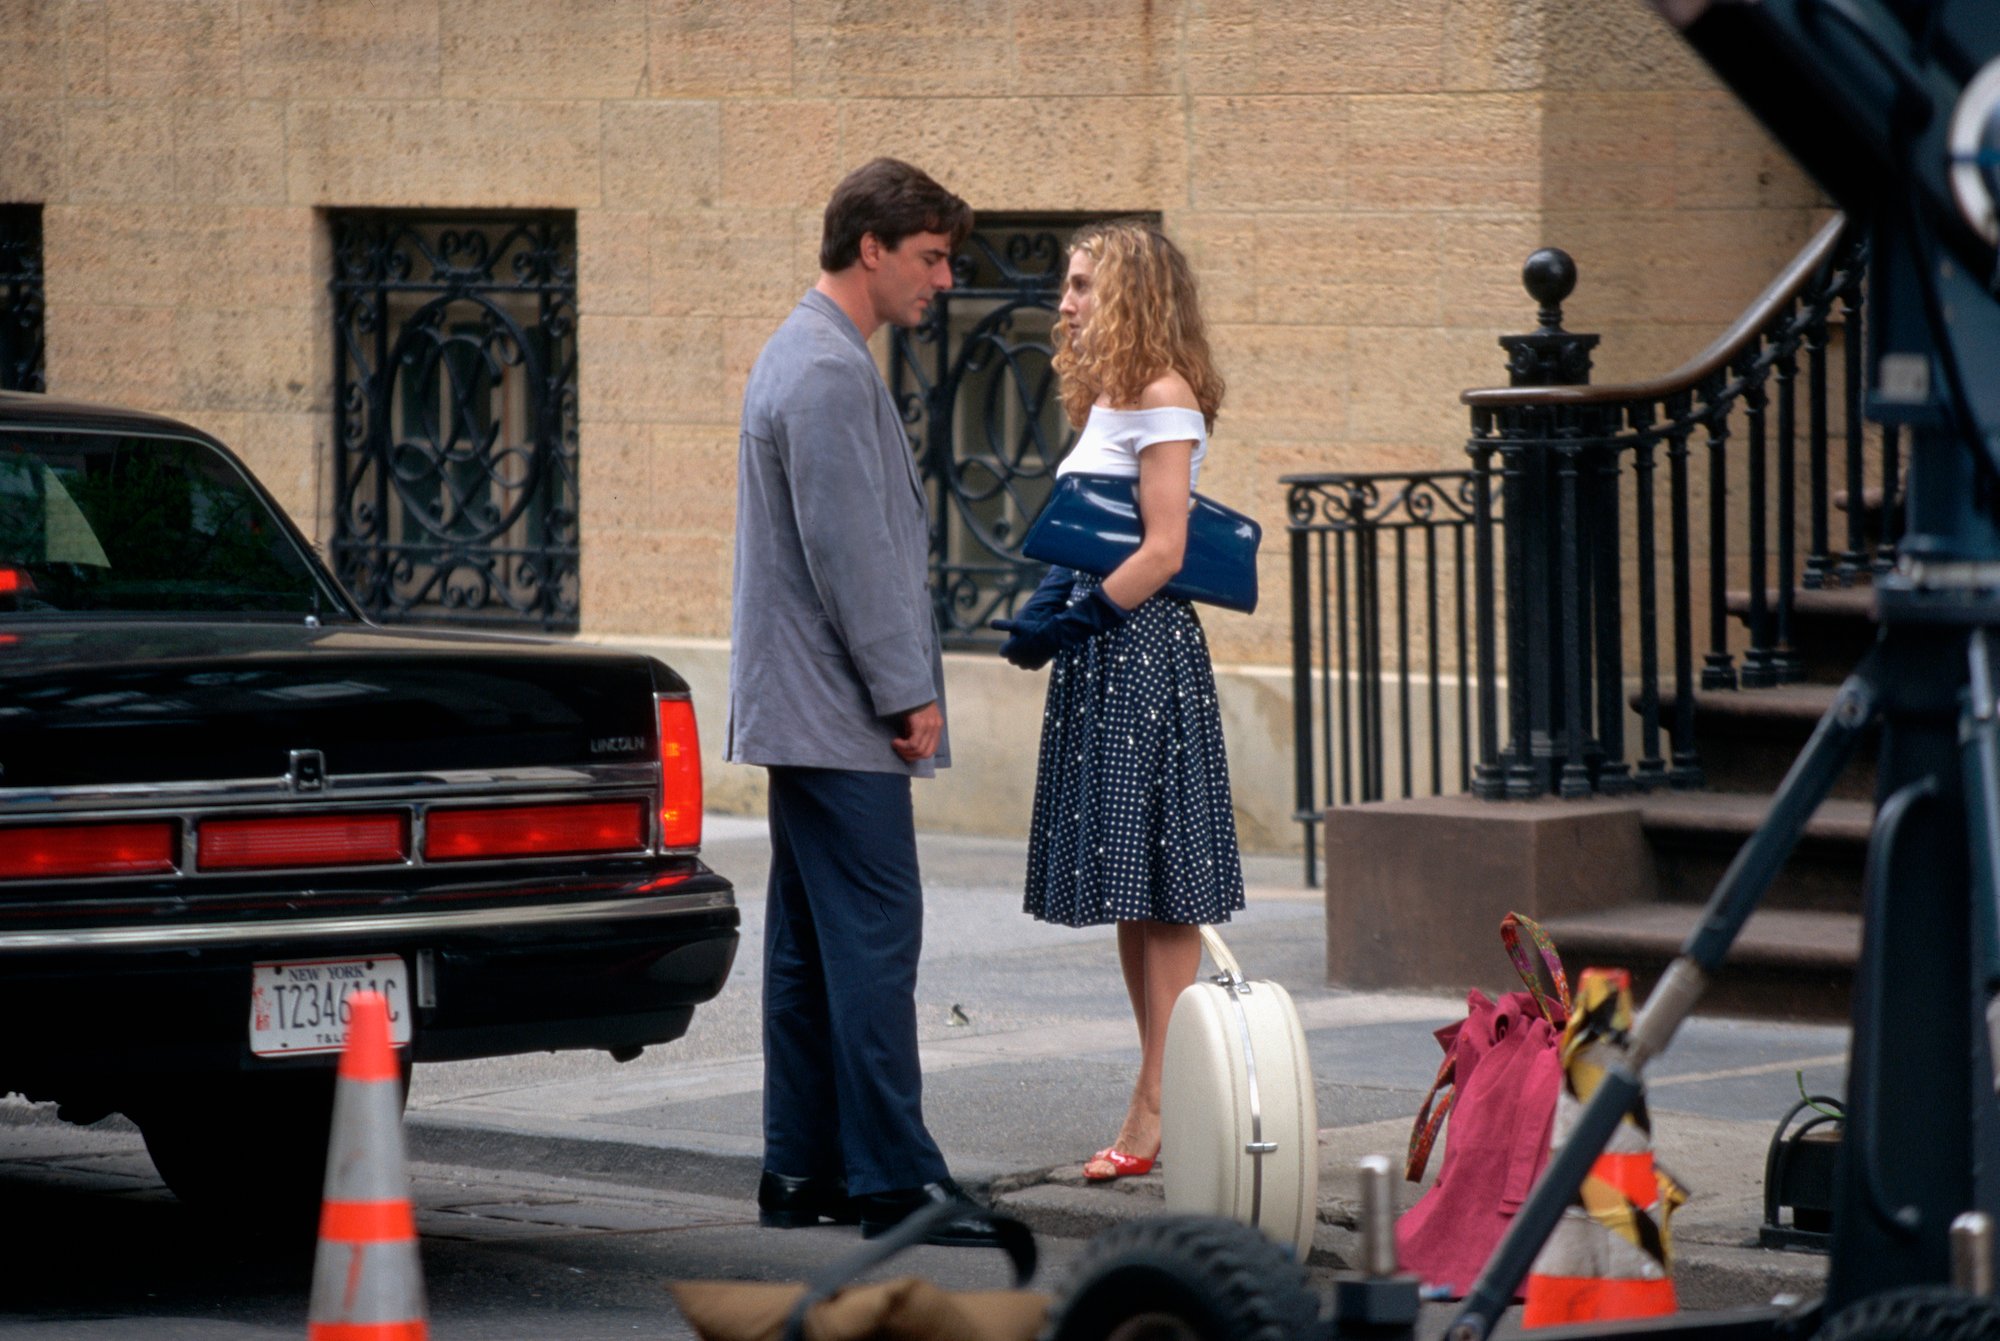 One Song Featured in ‘Sex and the City’ Perfectly Captures Carrie and Mr. Big’s Relationship